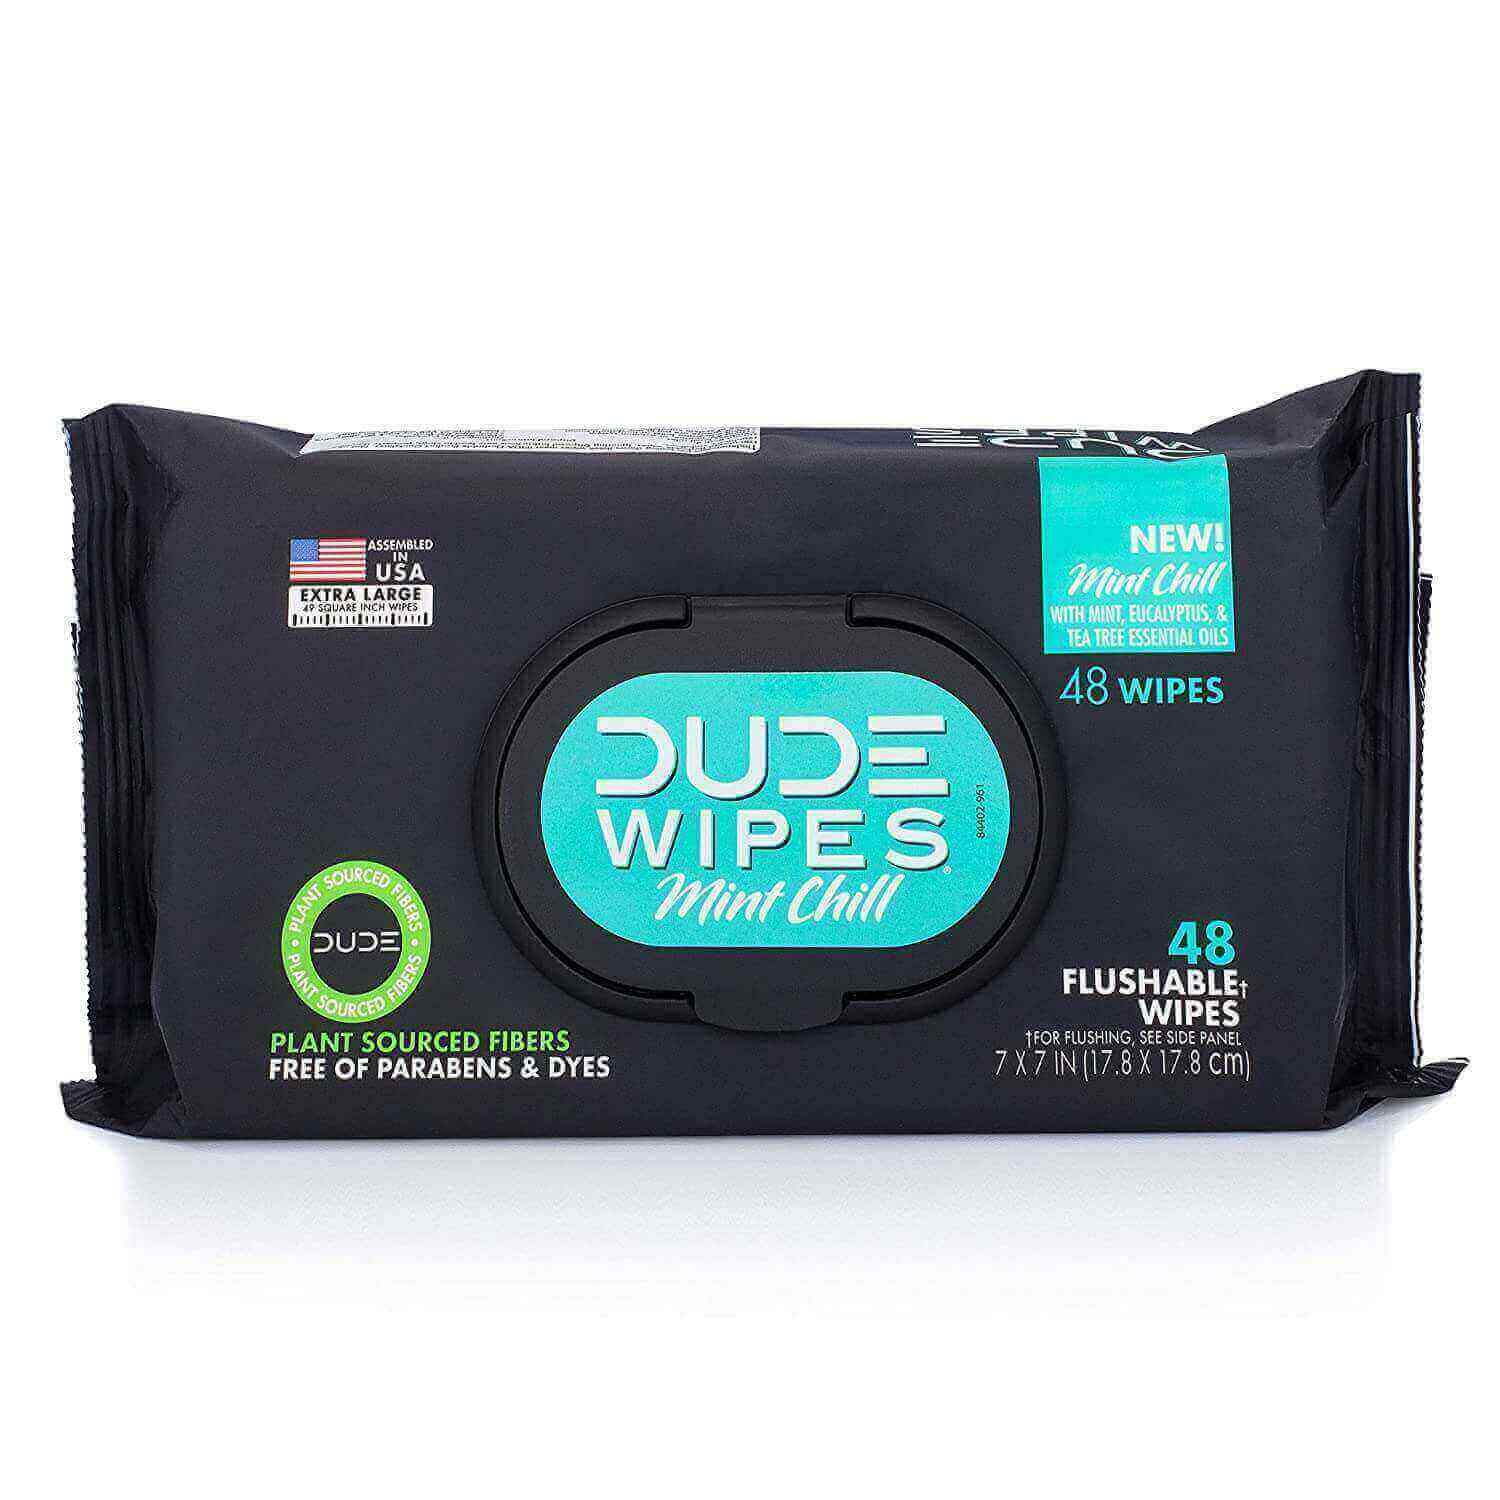 DUDE Wipes Flushable Wet Wipes Dispenser Mint Chill